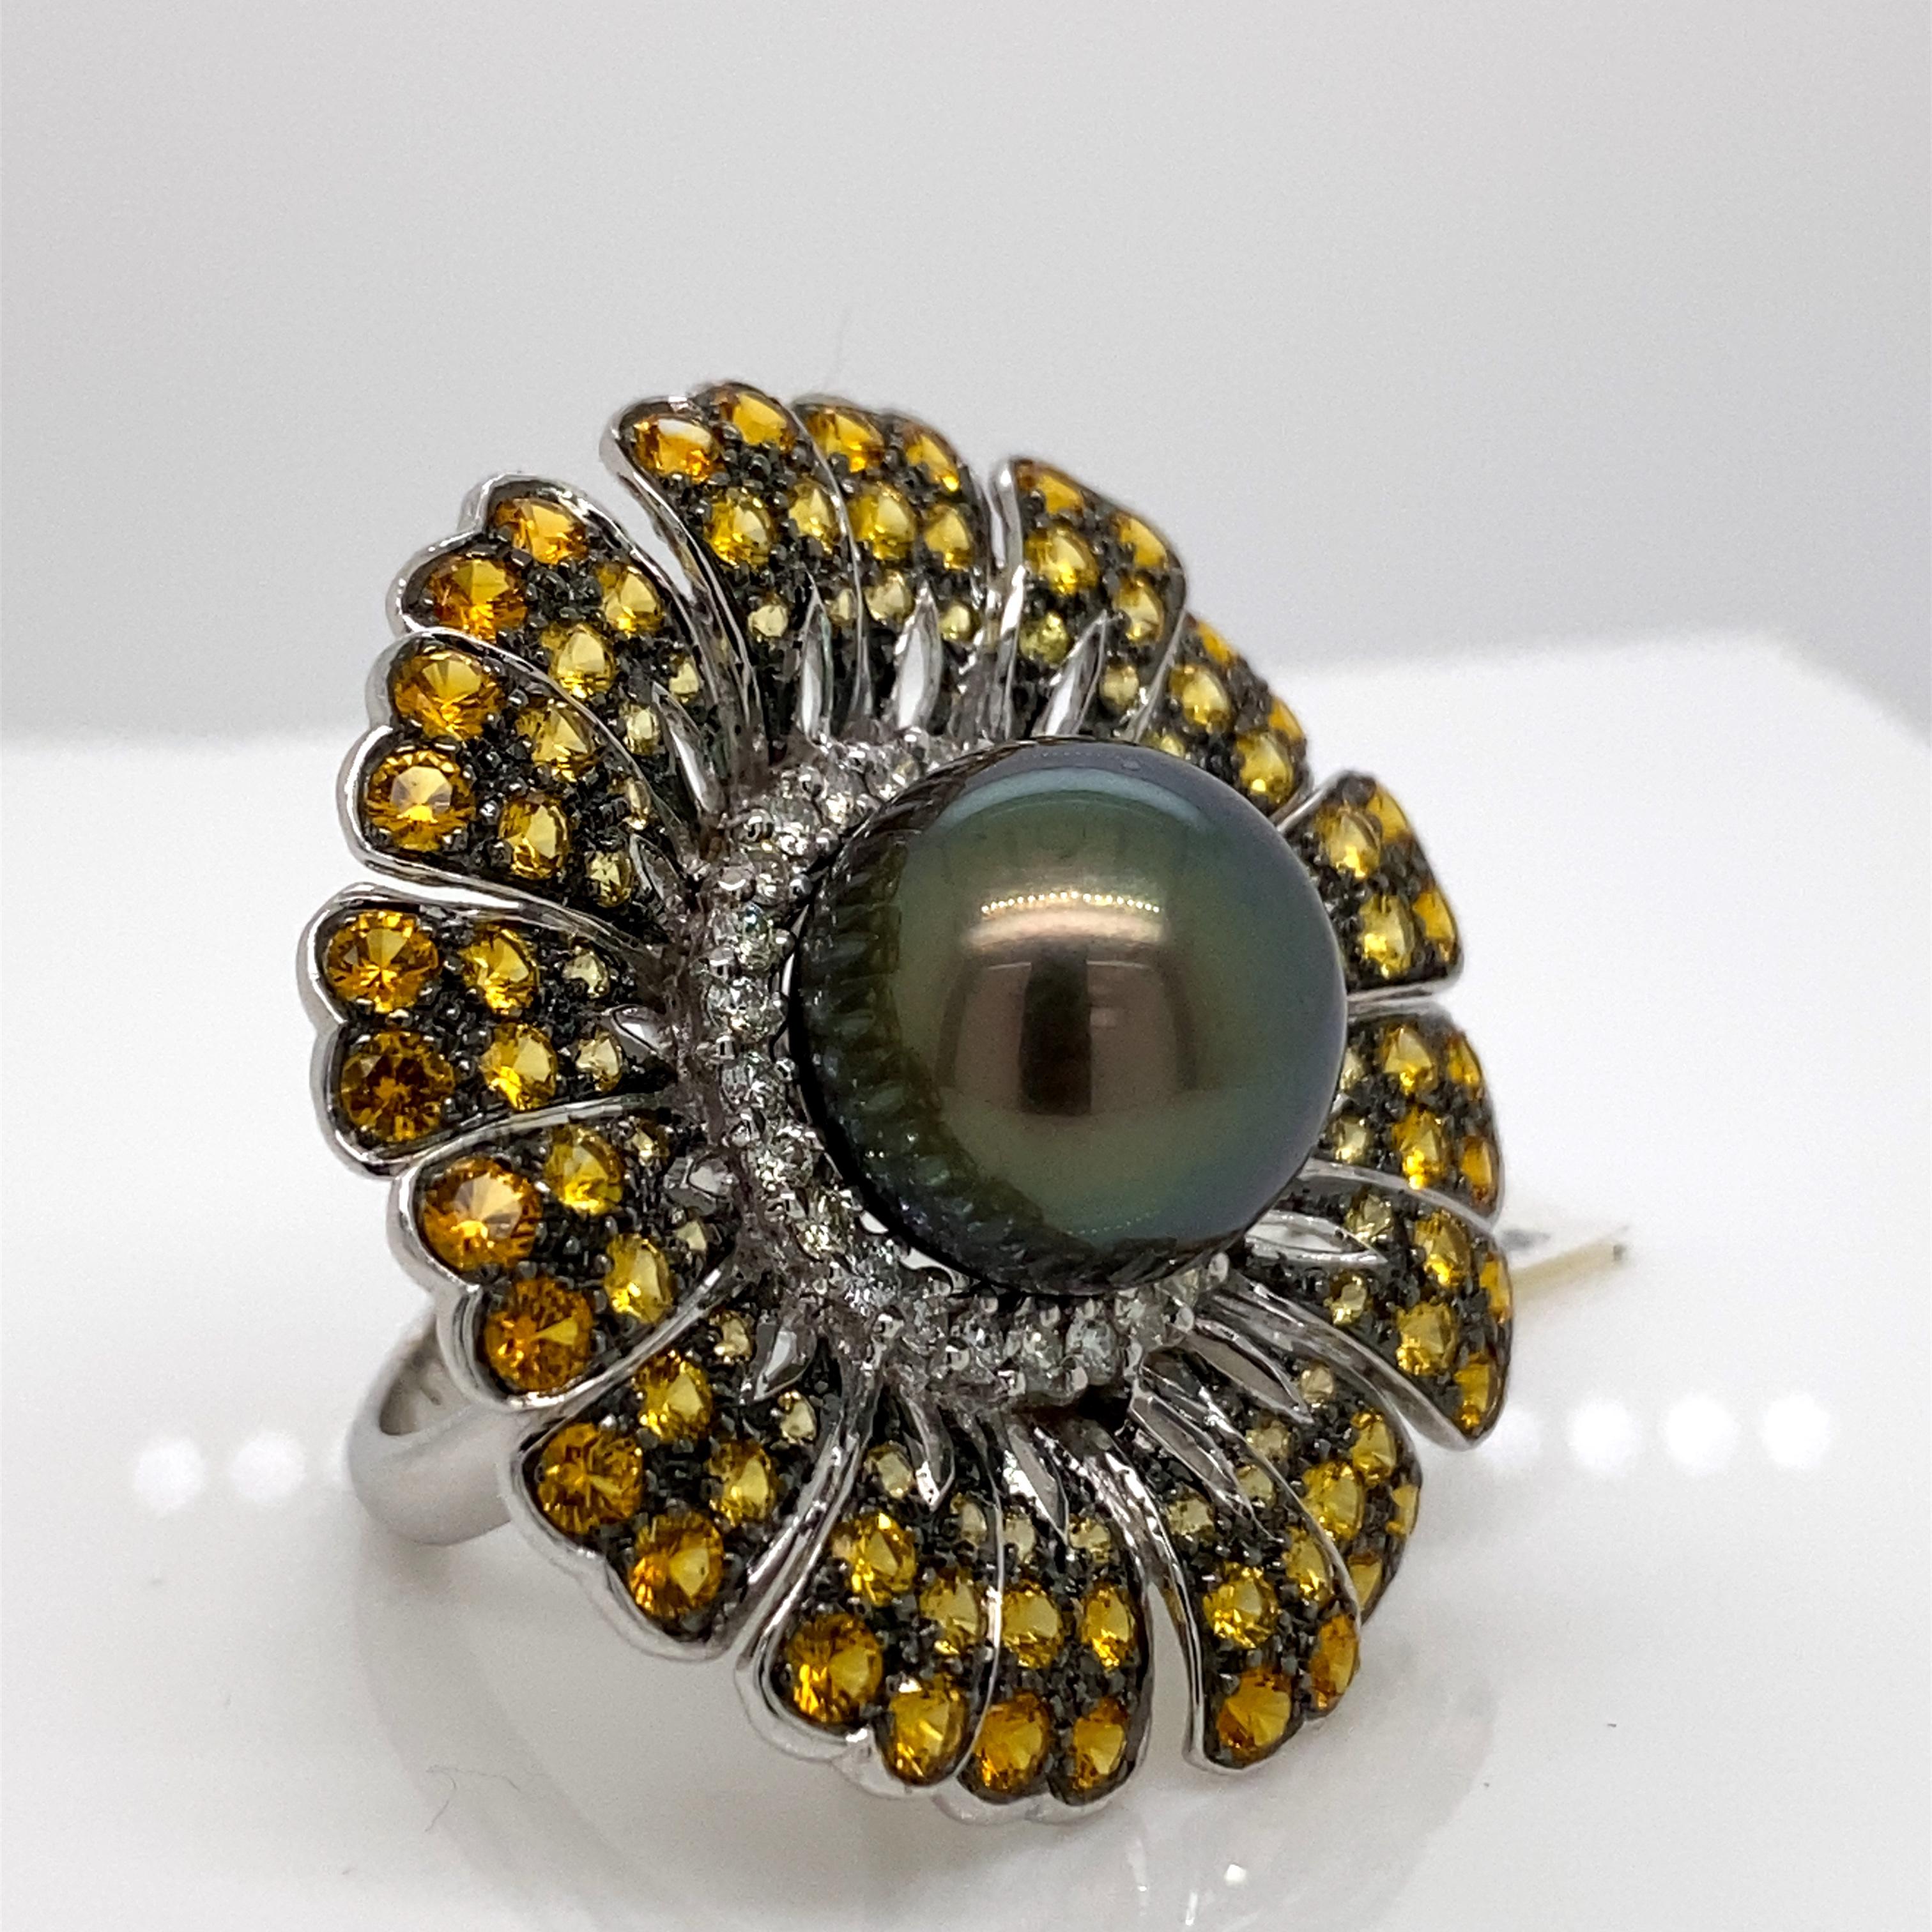 Exquisite and unique multi gemstone floral ring. 
Center Tahitian pearl surrounded by 4.80ct of round yellow sapphires heat and 0.78ct of round brilliant diamonds. 5.58ct total gemstone weight set in 18-karat white gold with black